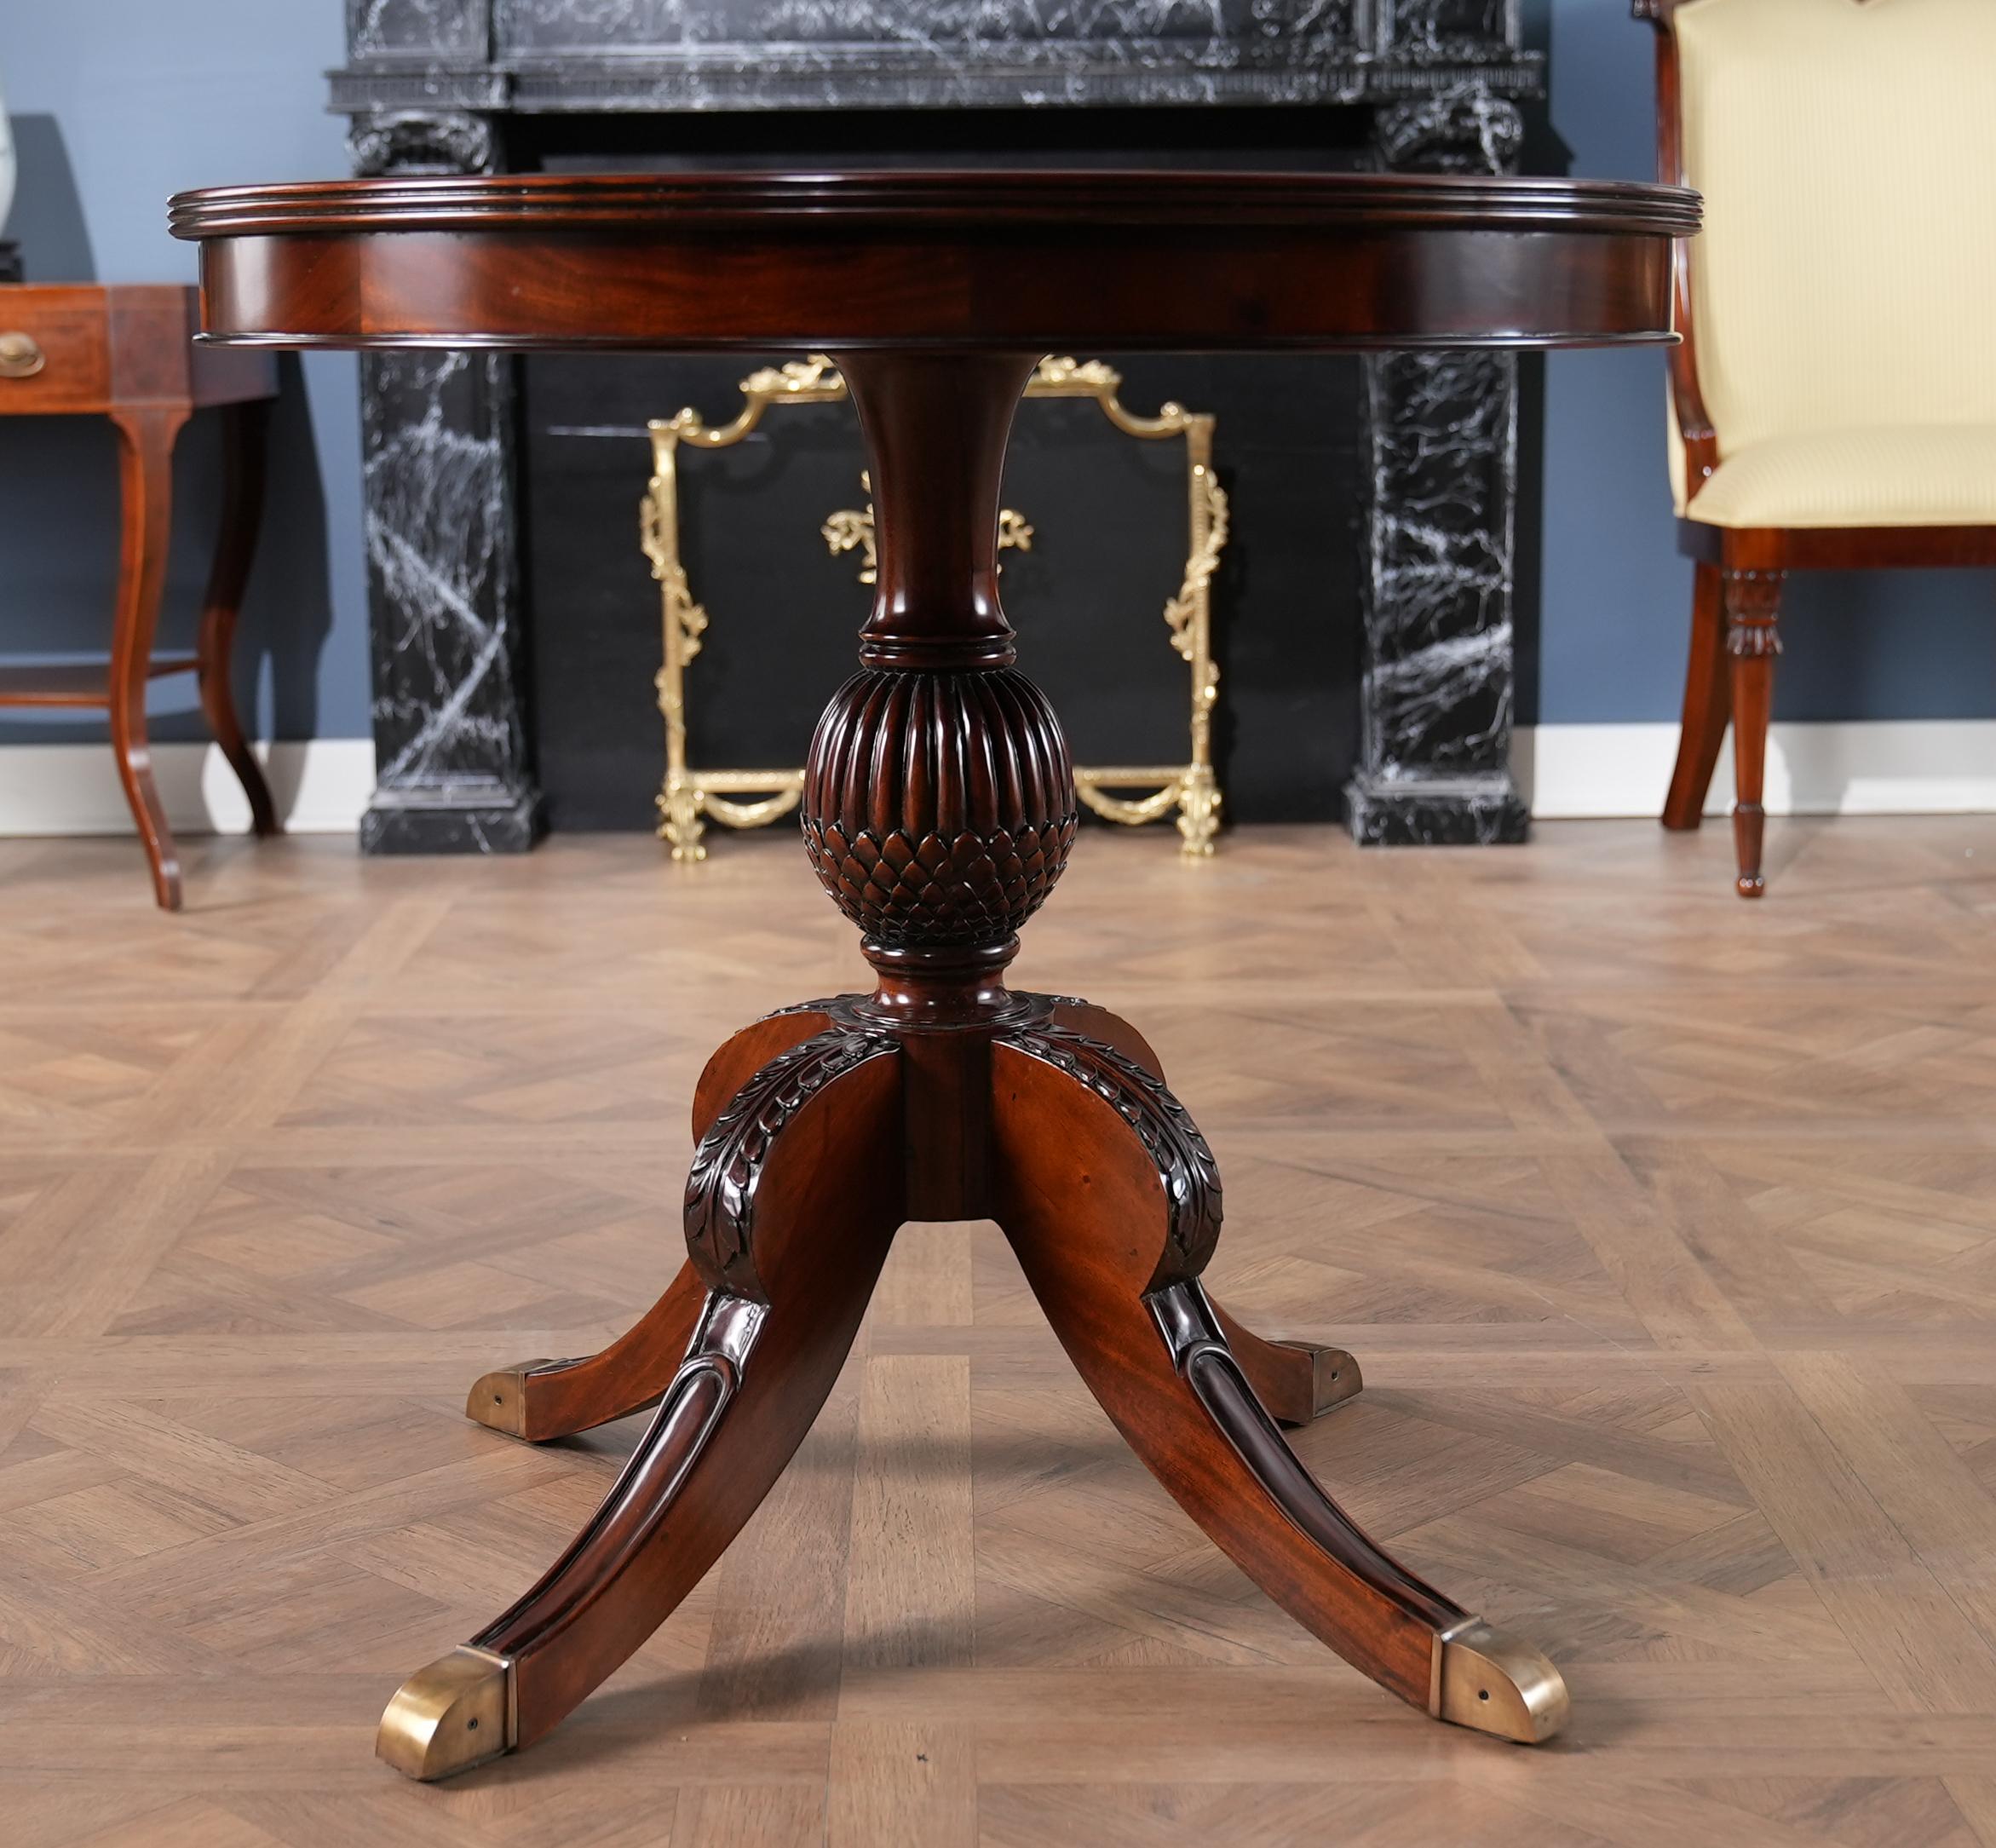 The elegant and refined Round Mahogany Pineapple Table from Niagara Furniture boasts a fantastic base carved to resemble the shape of a pineapple as well as a beautiful mahogany skirted top with a satinwood banded edge. The top portion of the Round